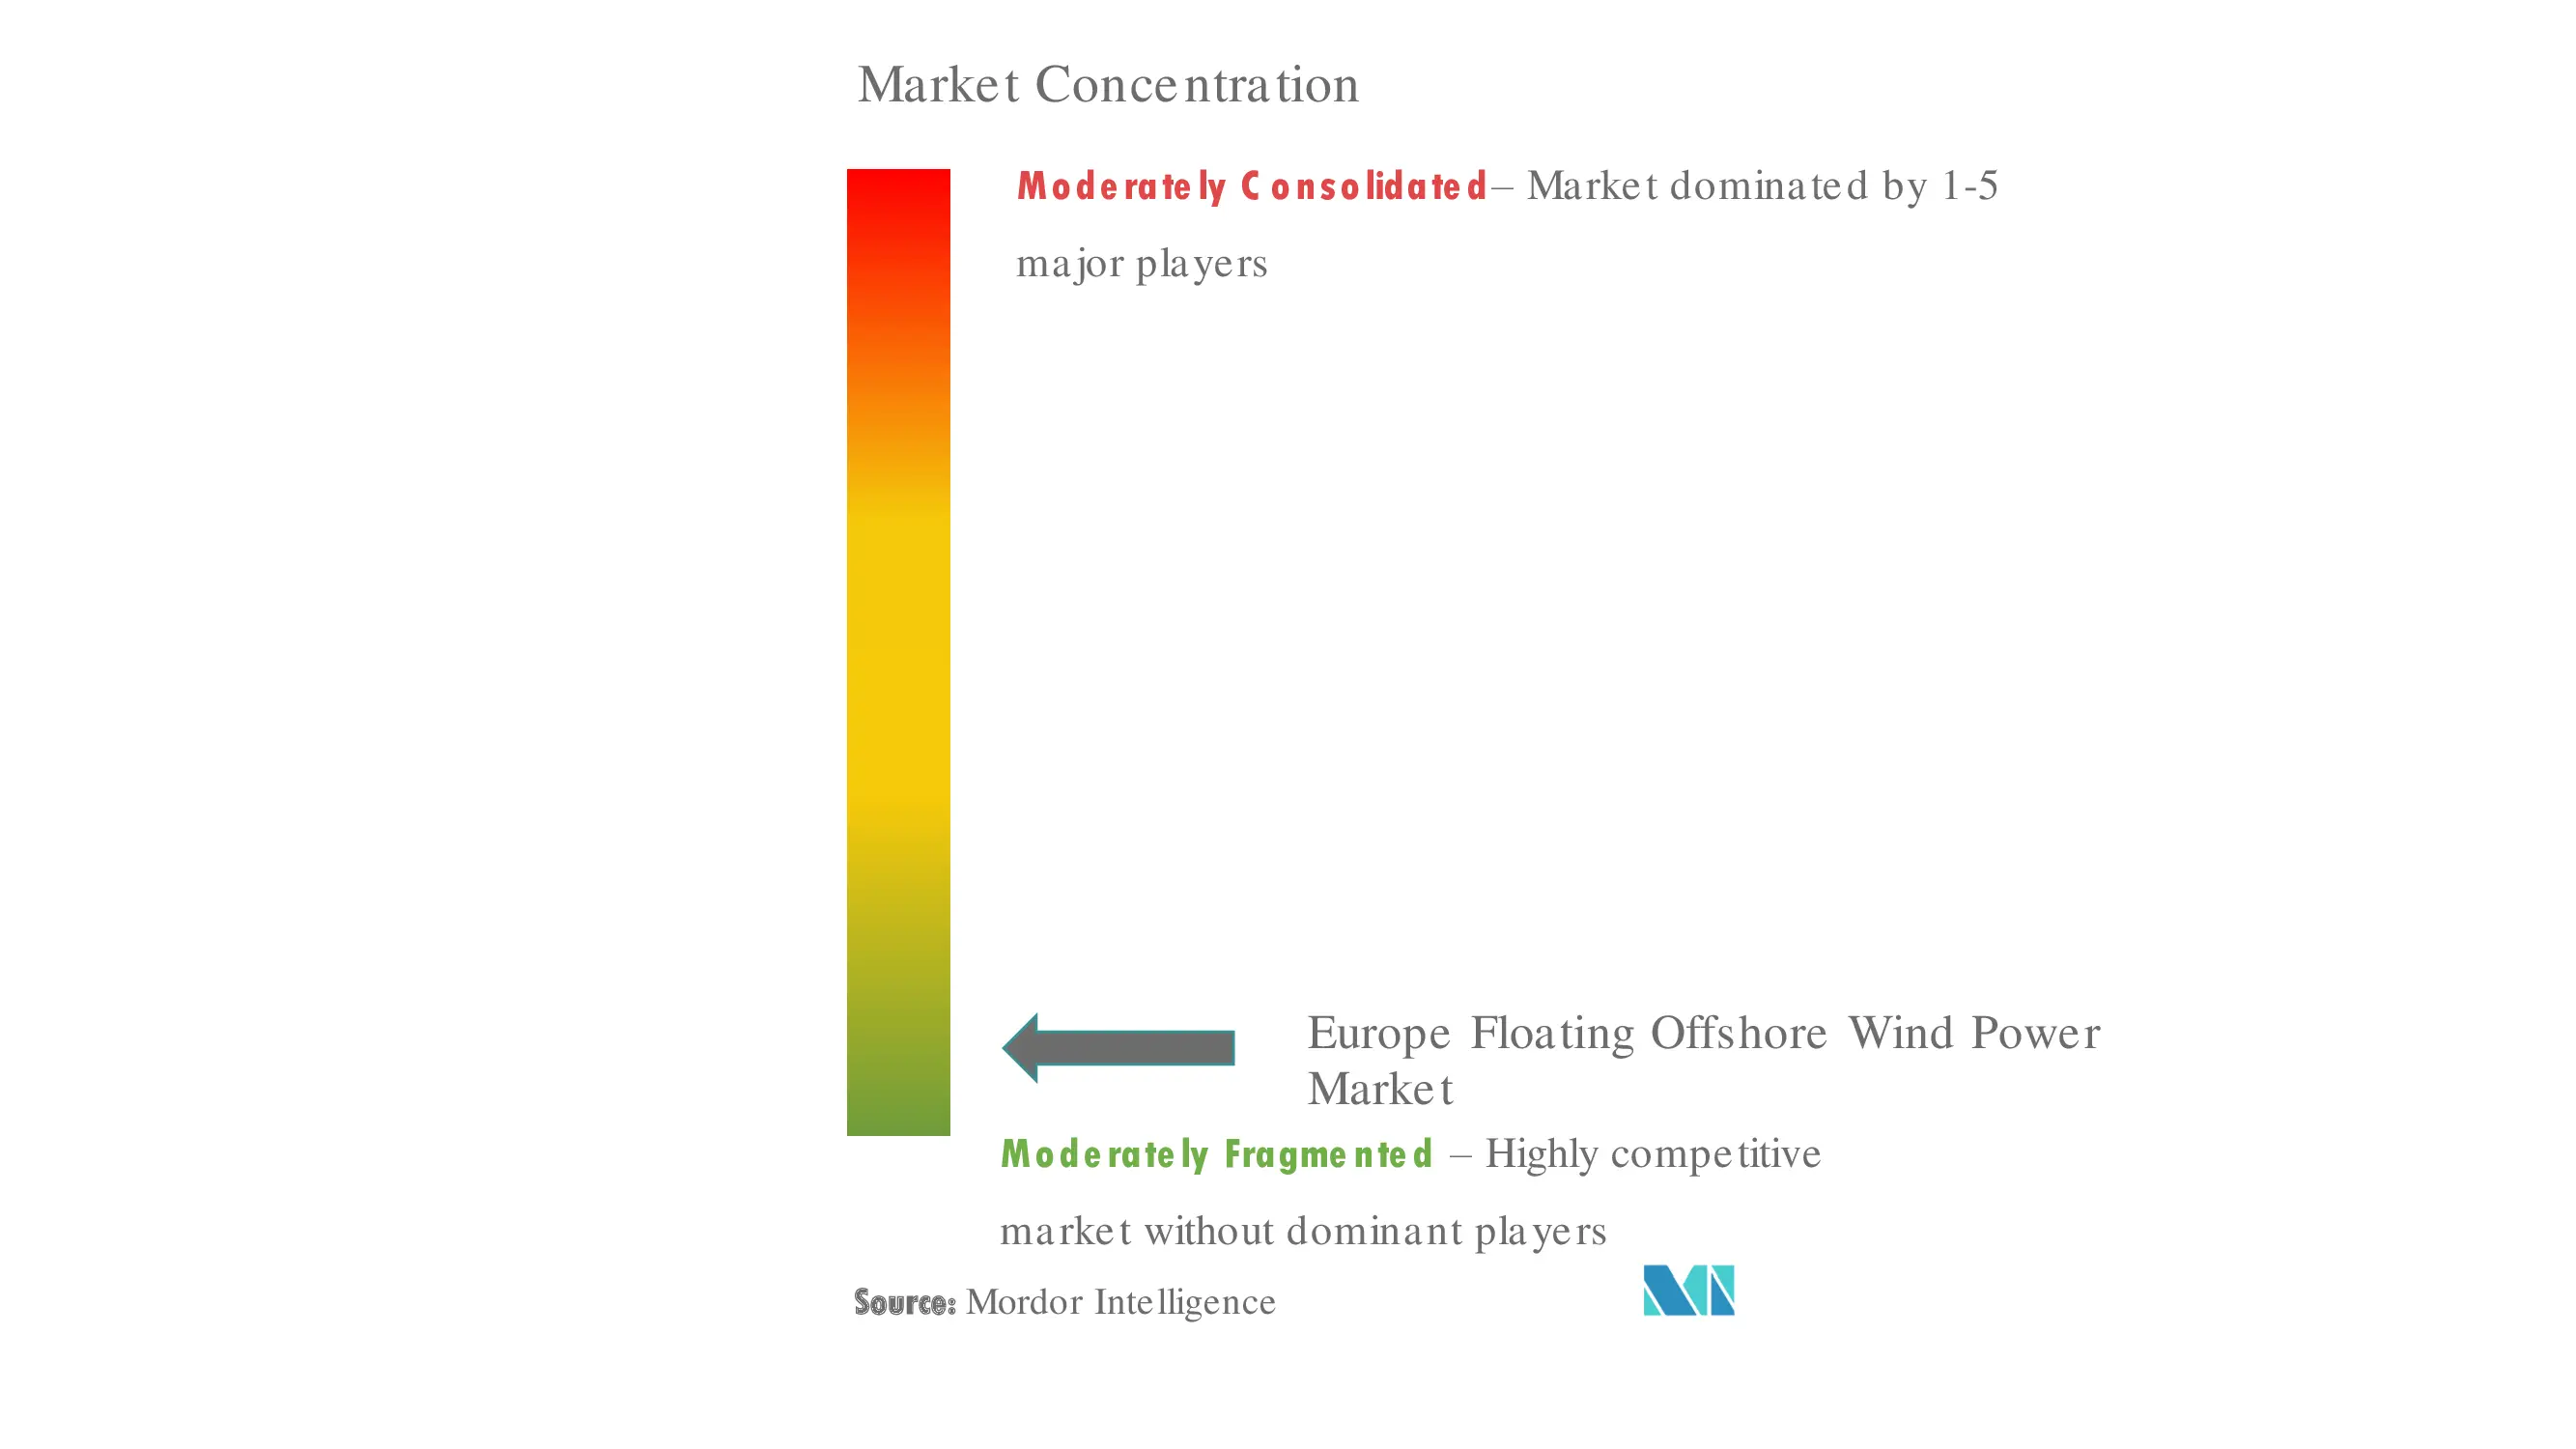 Europe Floating Offshore Wind Power Market Concentration